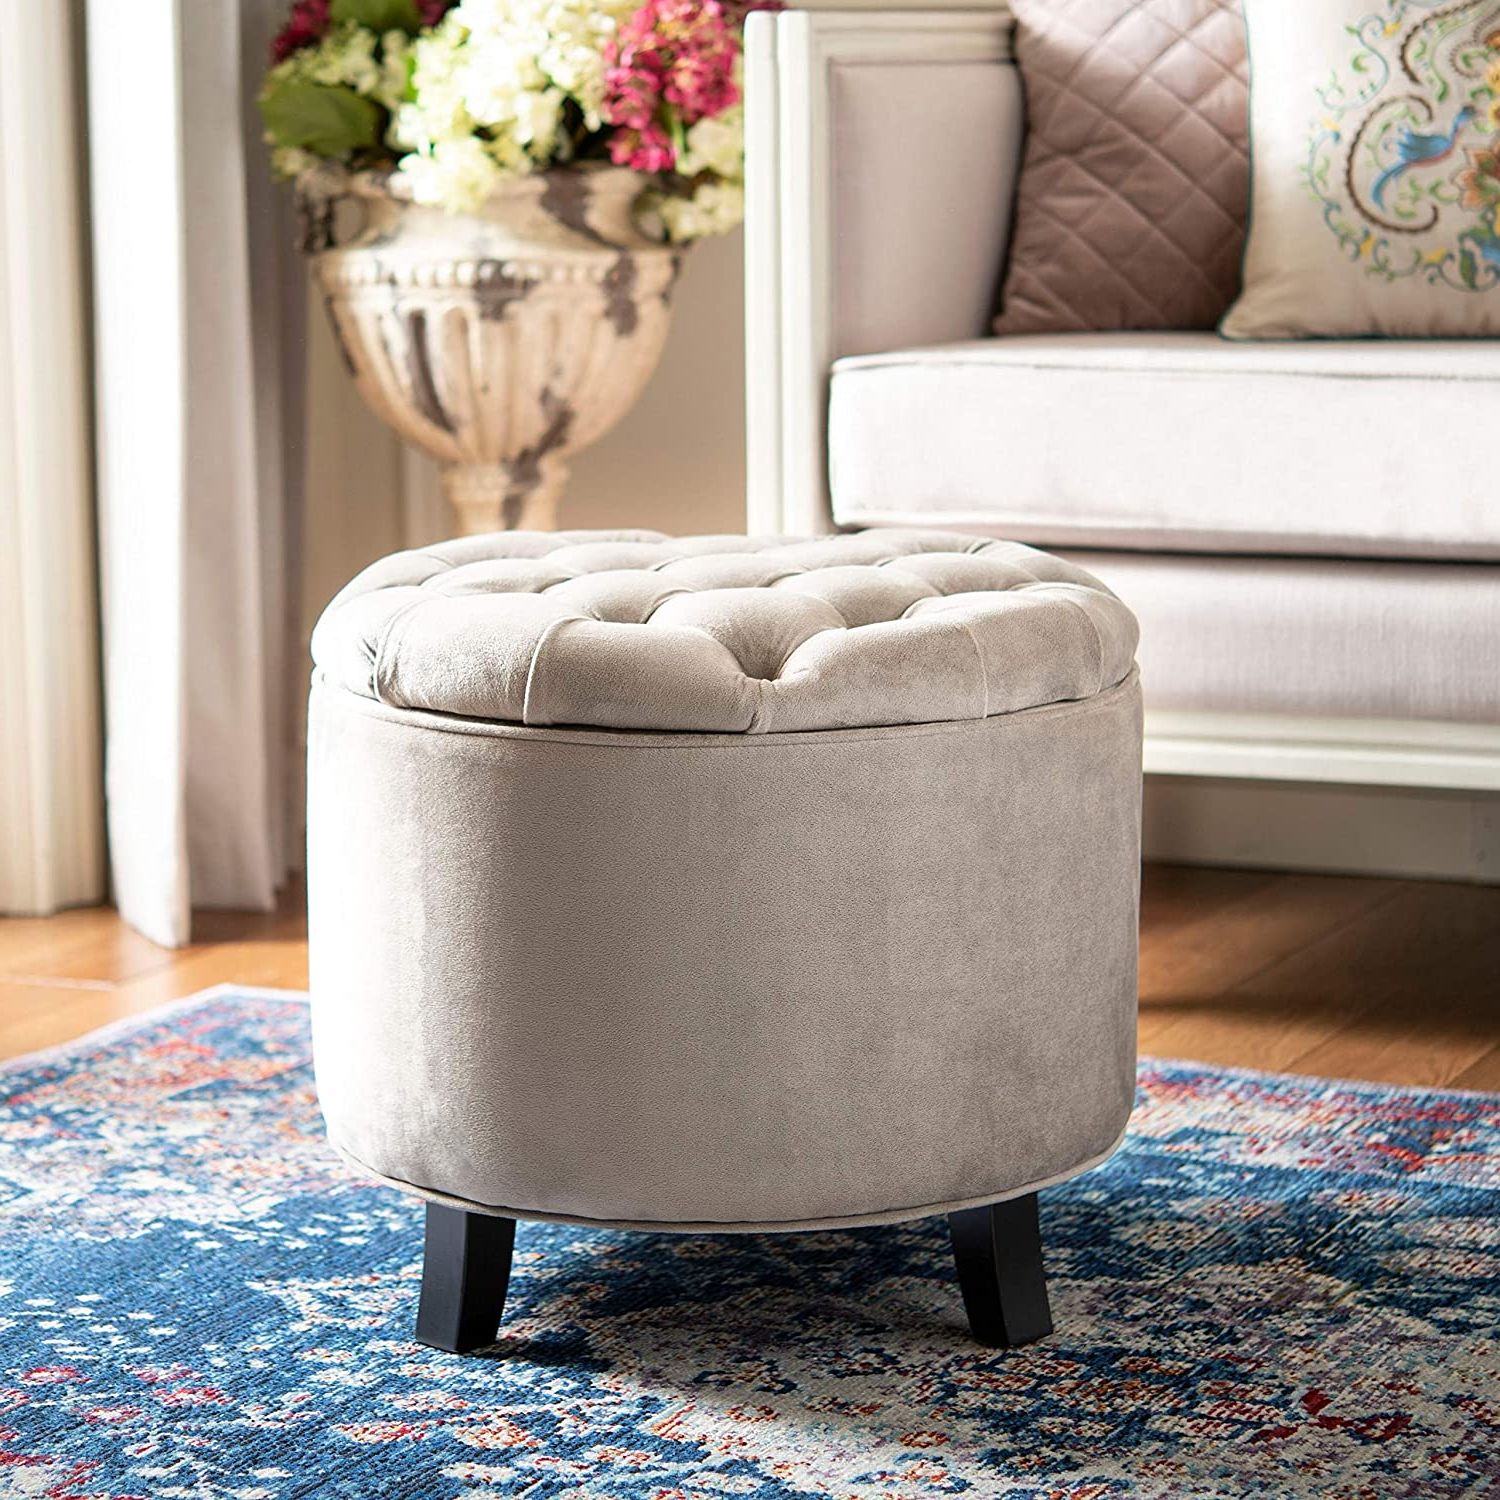 Amazon: Mushroom Taupe Tufted Storage Ottoman Brown French Country For Popular Velvet Ribbed Fabric Round Storage Ottomans (View 3 of 10)